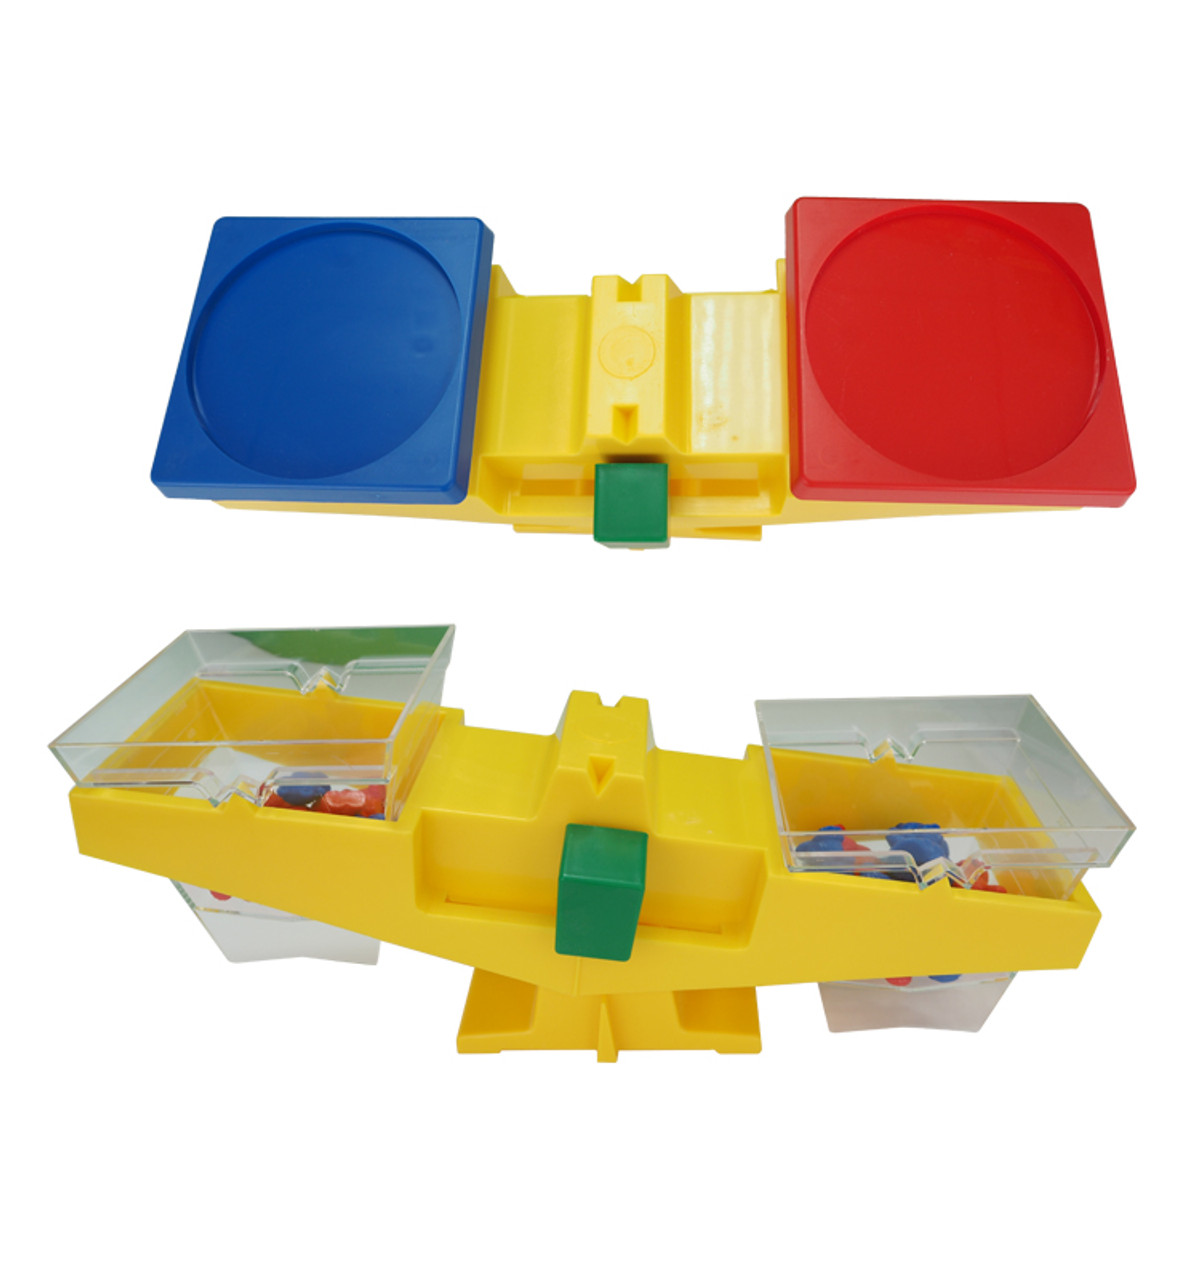 preschool-math-toy-counting-bears-balance-scale-new-Educational-Balance-Scale-for-liquids-and-solids